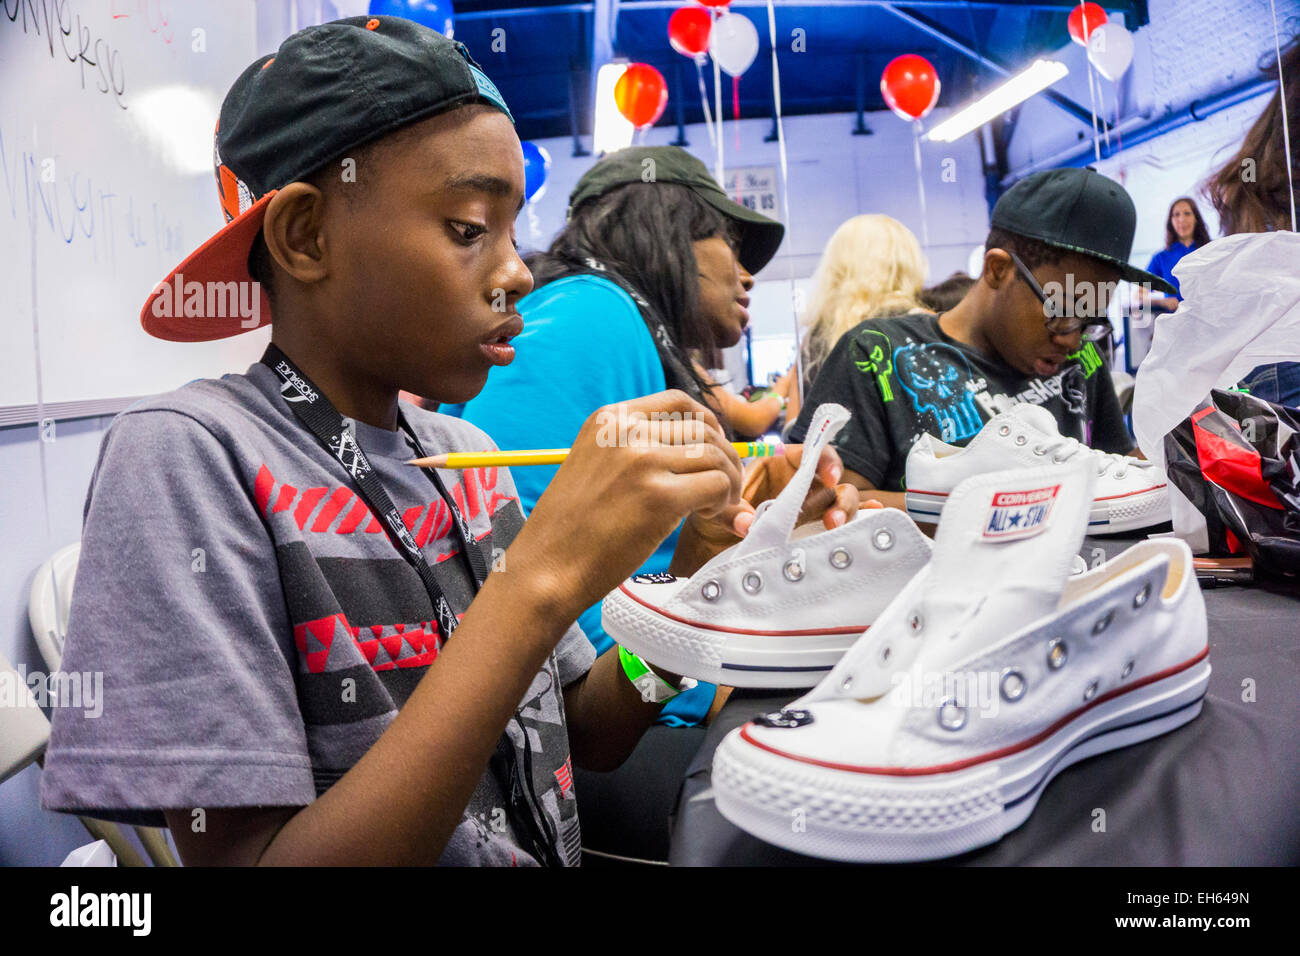 Los Angeles, California, USA. 7th Mar, 2015. Darius Williams works on decorating his new Converse Chuck Taylor shoes donated by the Shoe Palace shoe chain and Converse at the Society of St. Vincent de Paul, Council of Los Angeles on Saturday, March 7, 2015. Many families in Los Angeles have to choose between food and footwear. In response, the Society of St. Vincent de Paul, Council of Los Angeles; a Catholic non-profit; the Shoe Palace shoe chain and Converse and gave away 150 pairs to Los Angeles children. © Jonathan Alcorn/ZUMA Wire/Alamy Live News Stock Photo